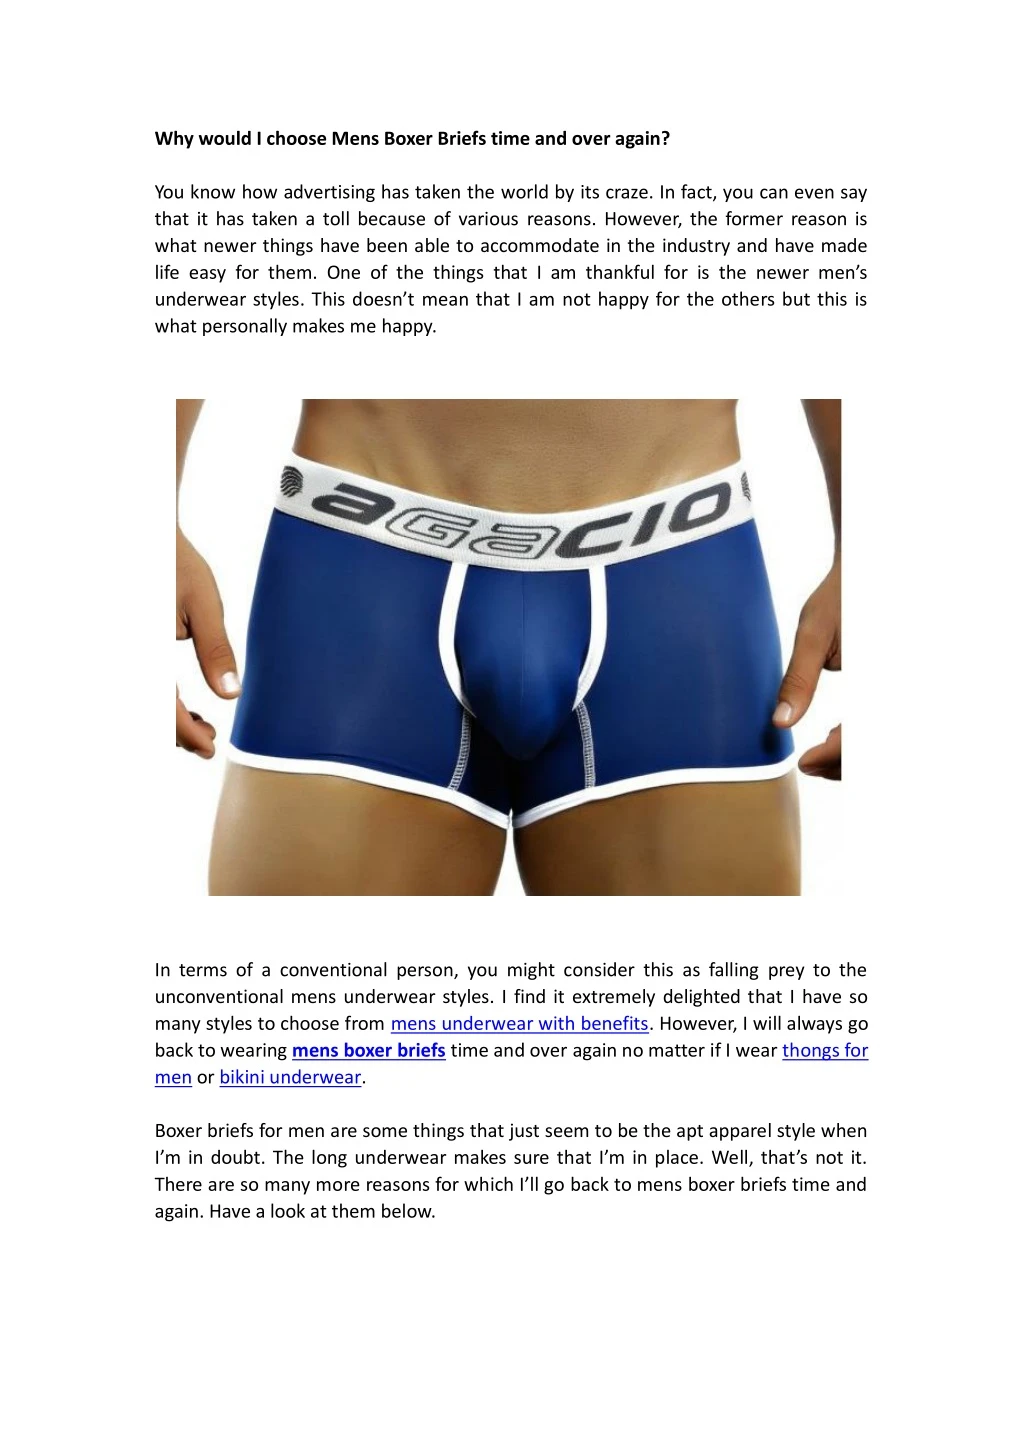 why would i choose mens boxer briefs time